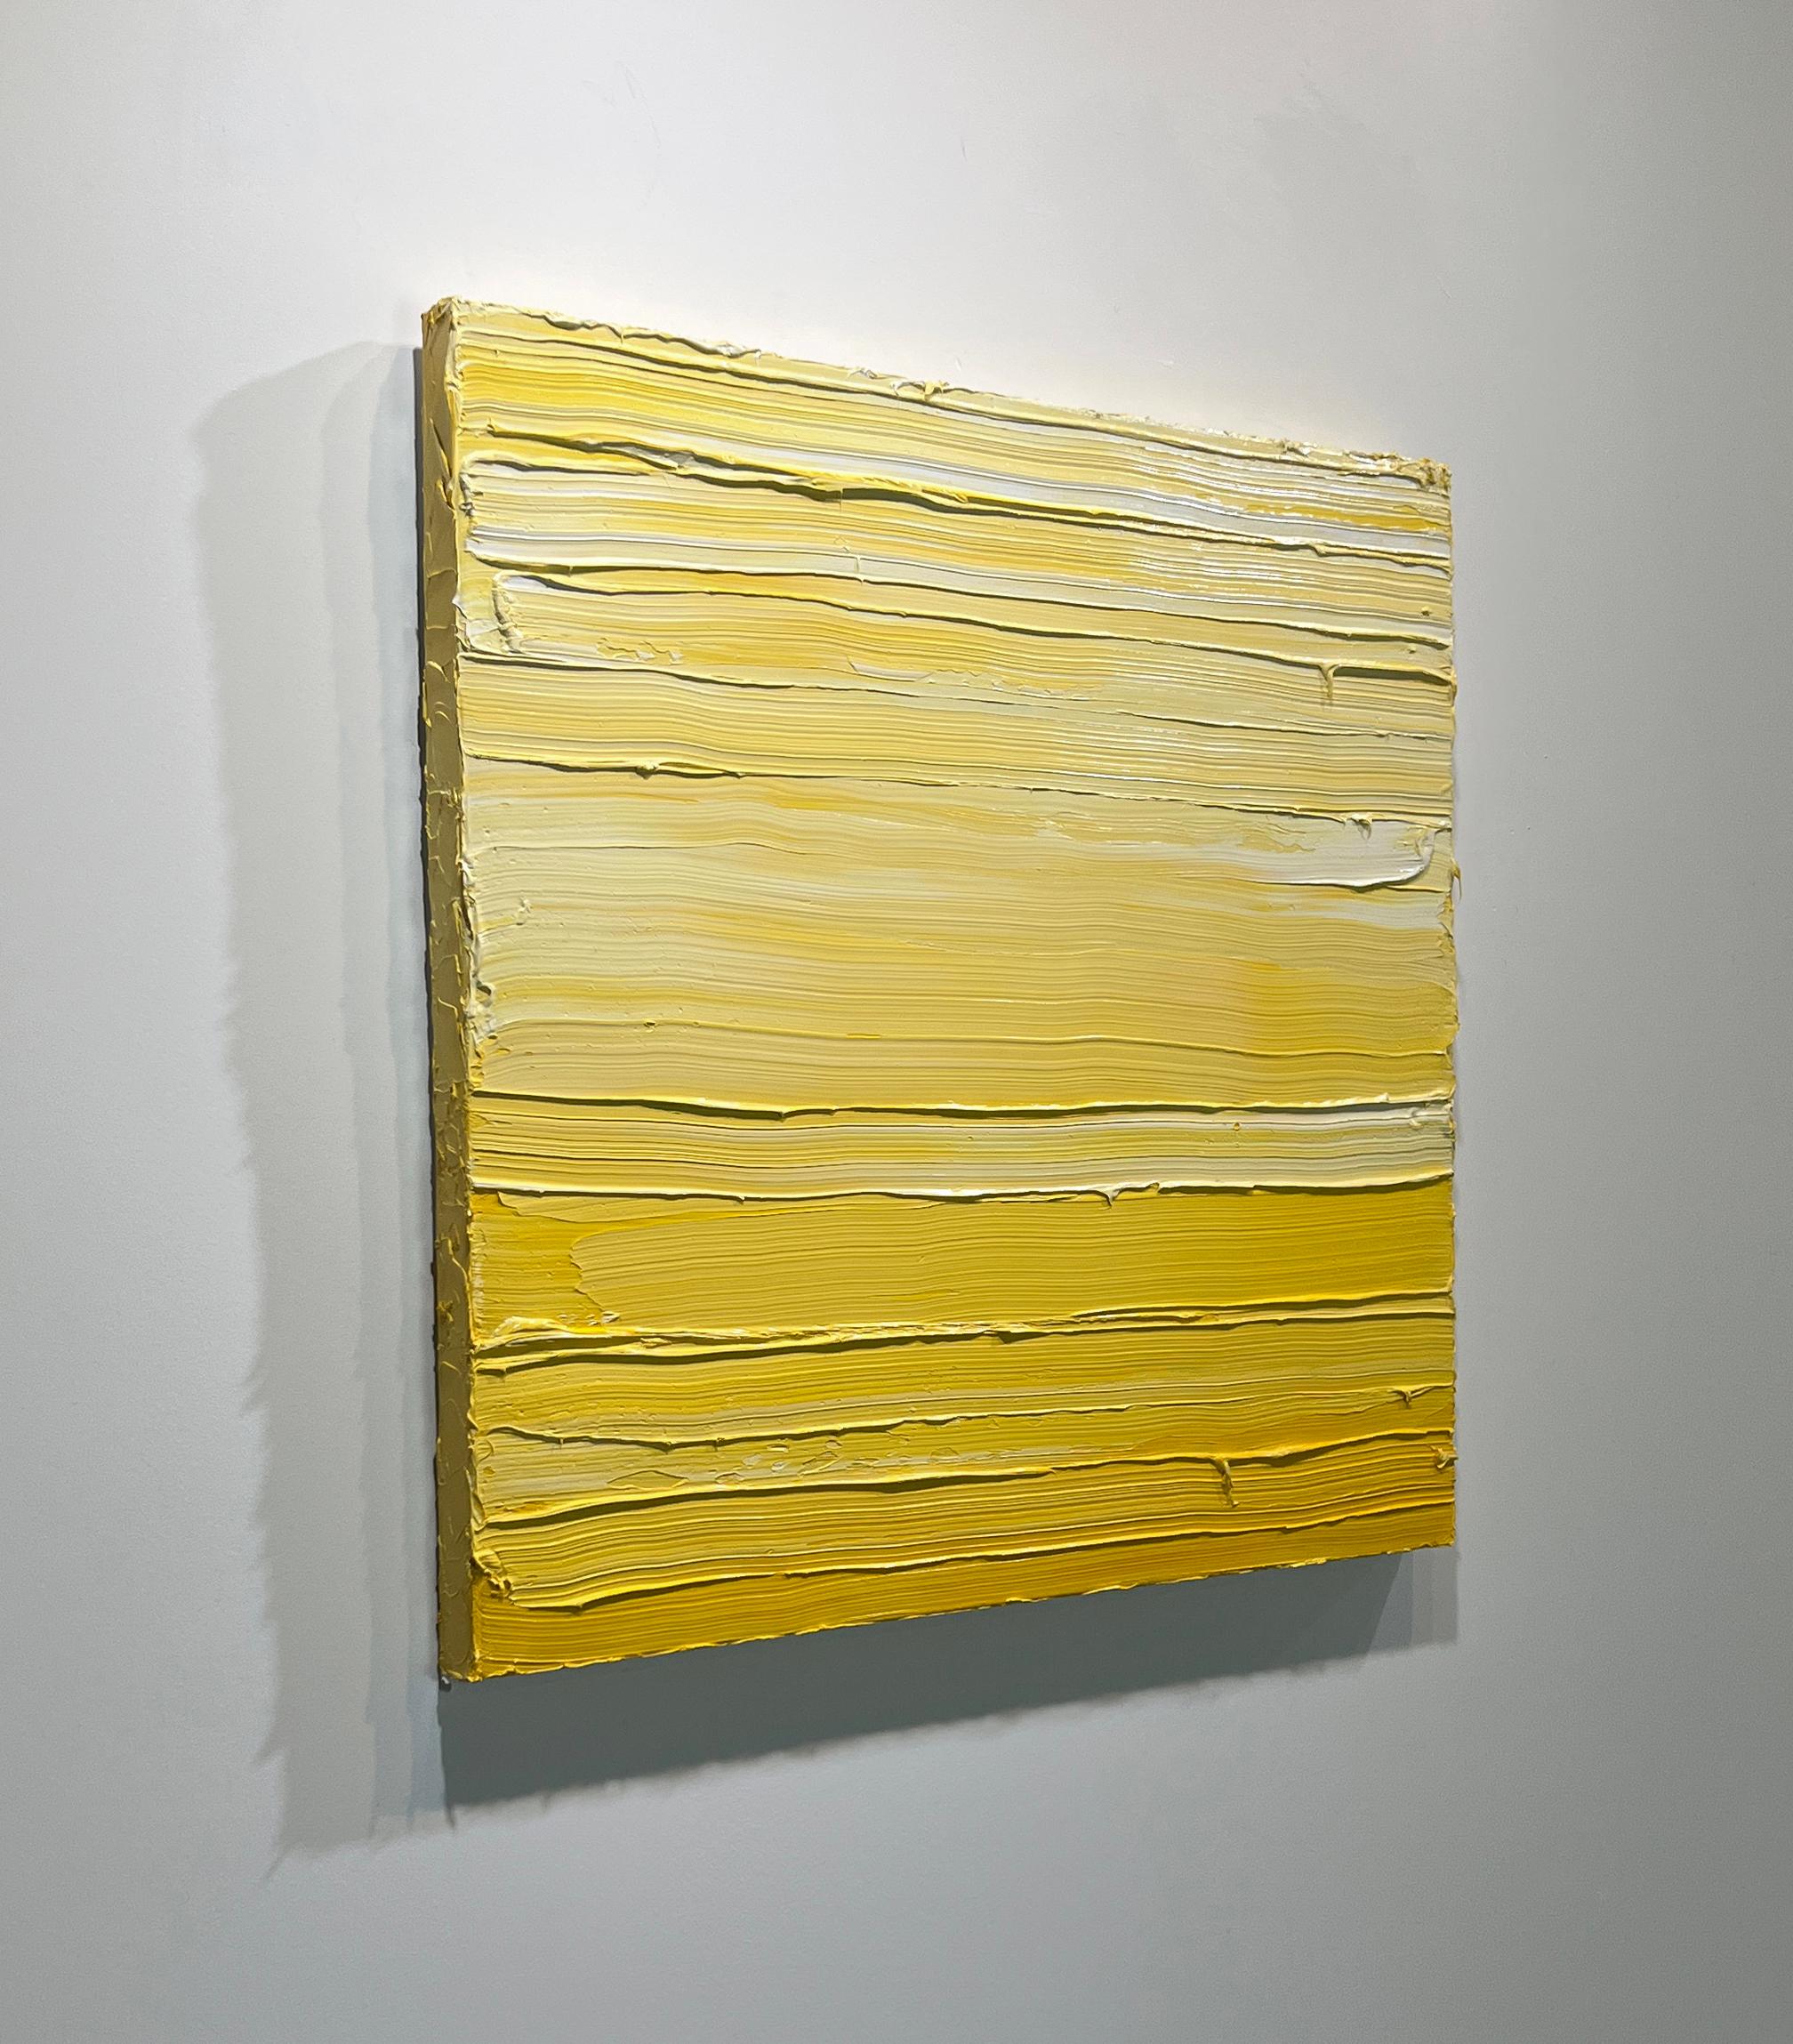 This contemporary abstract painting by Teodora Guererra features a bright yellow and white palette. The artist applies thick layers of yellow and white paint across the painting in horizontal gestures, giving the surface of the canvas texture. It is